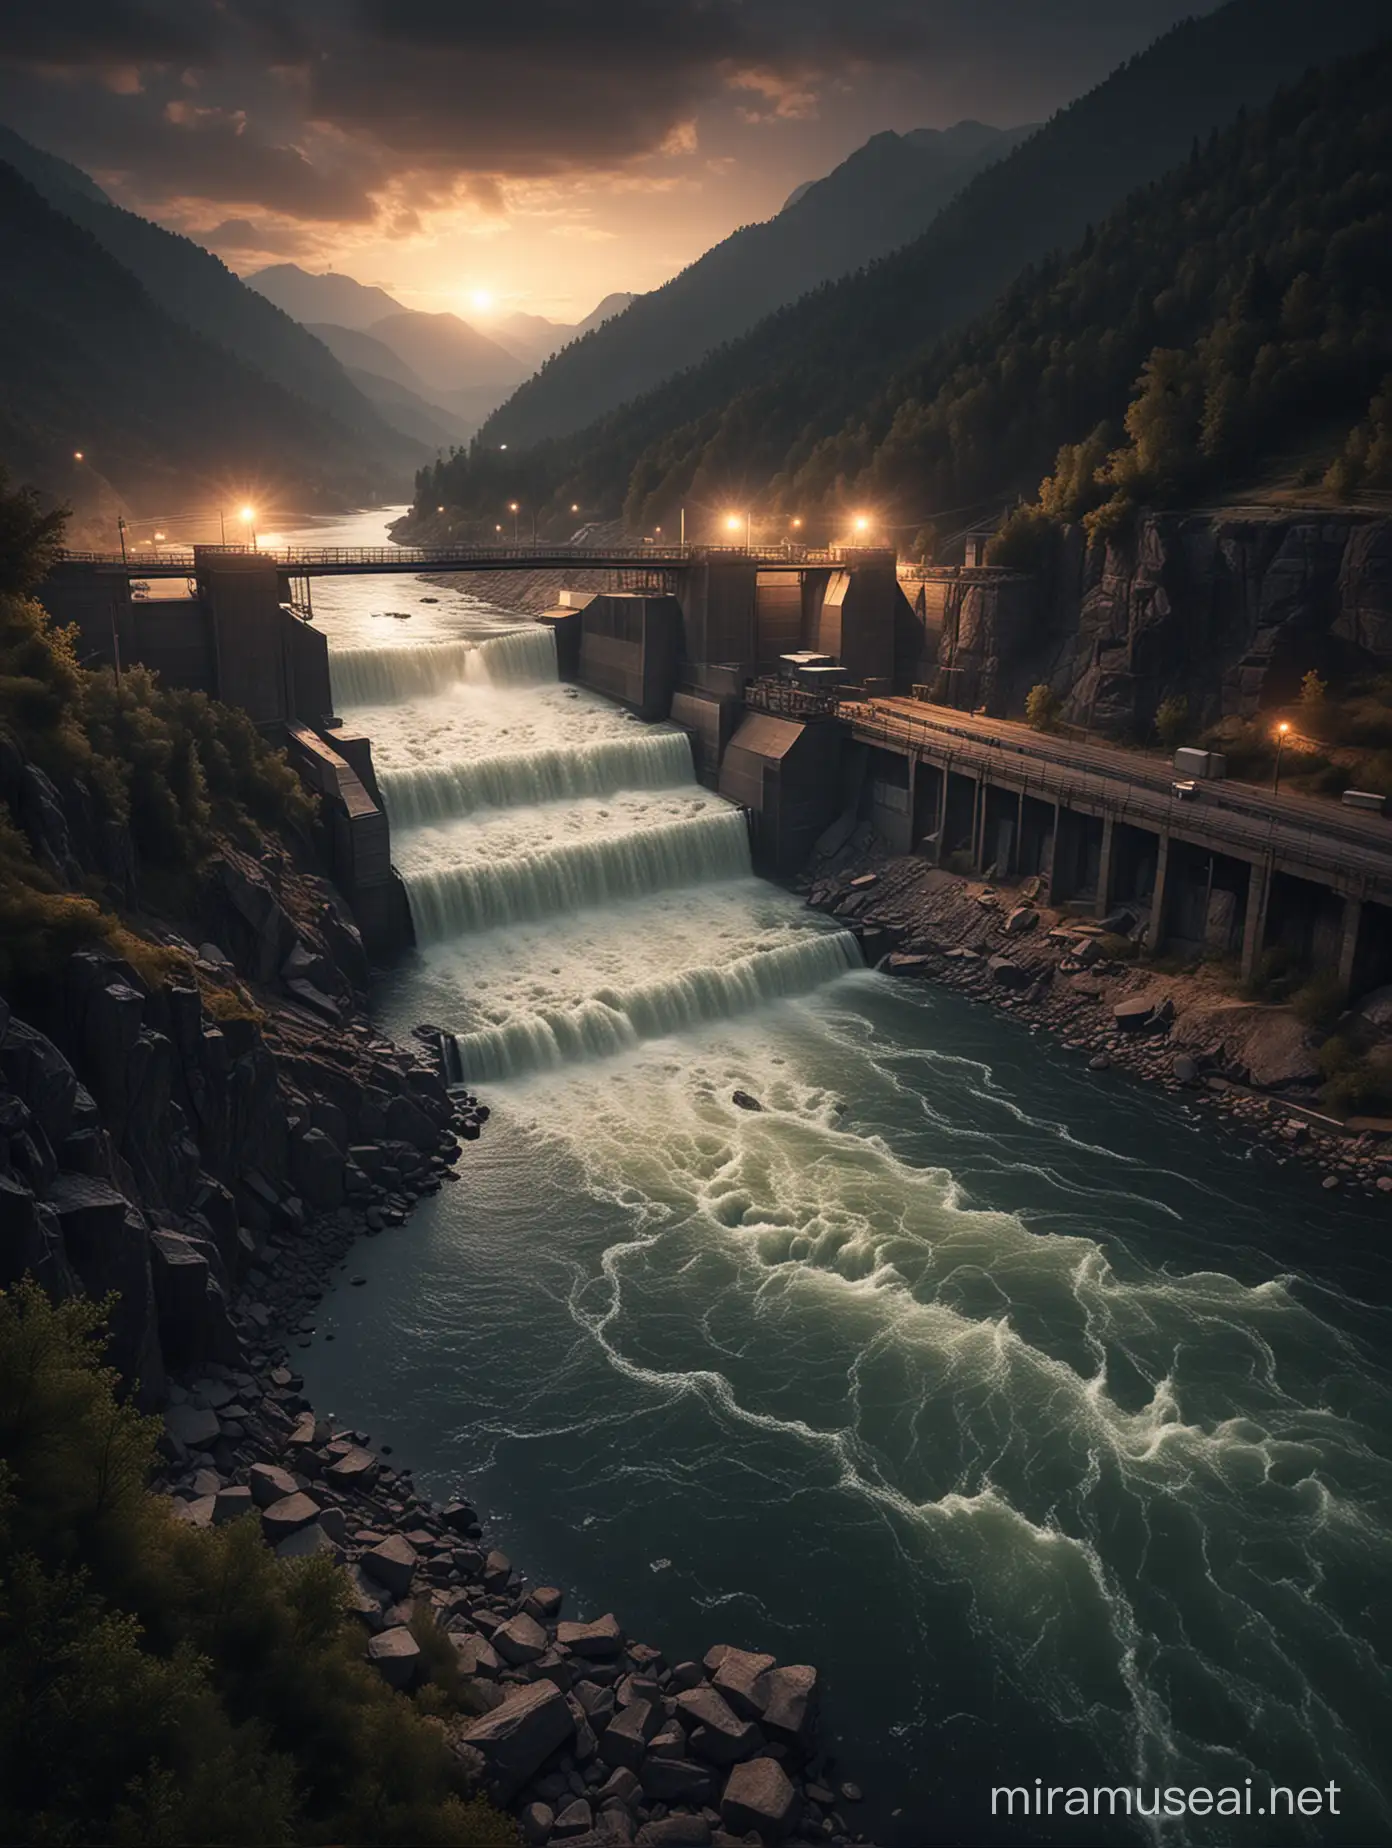 Impressive Night View of Abandoned Hydroelectric Plant with Flowing Water